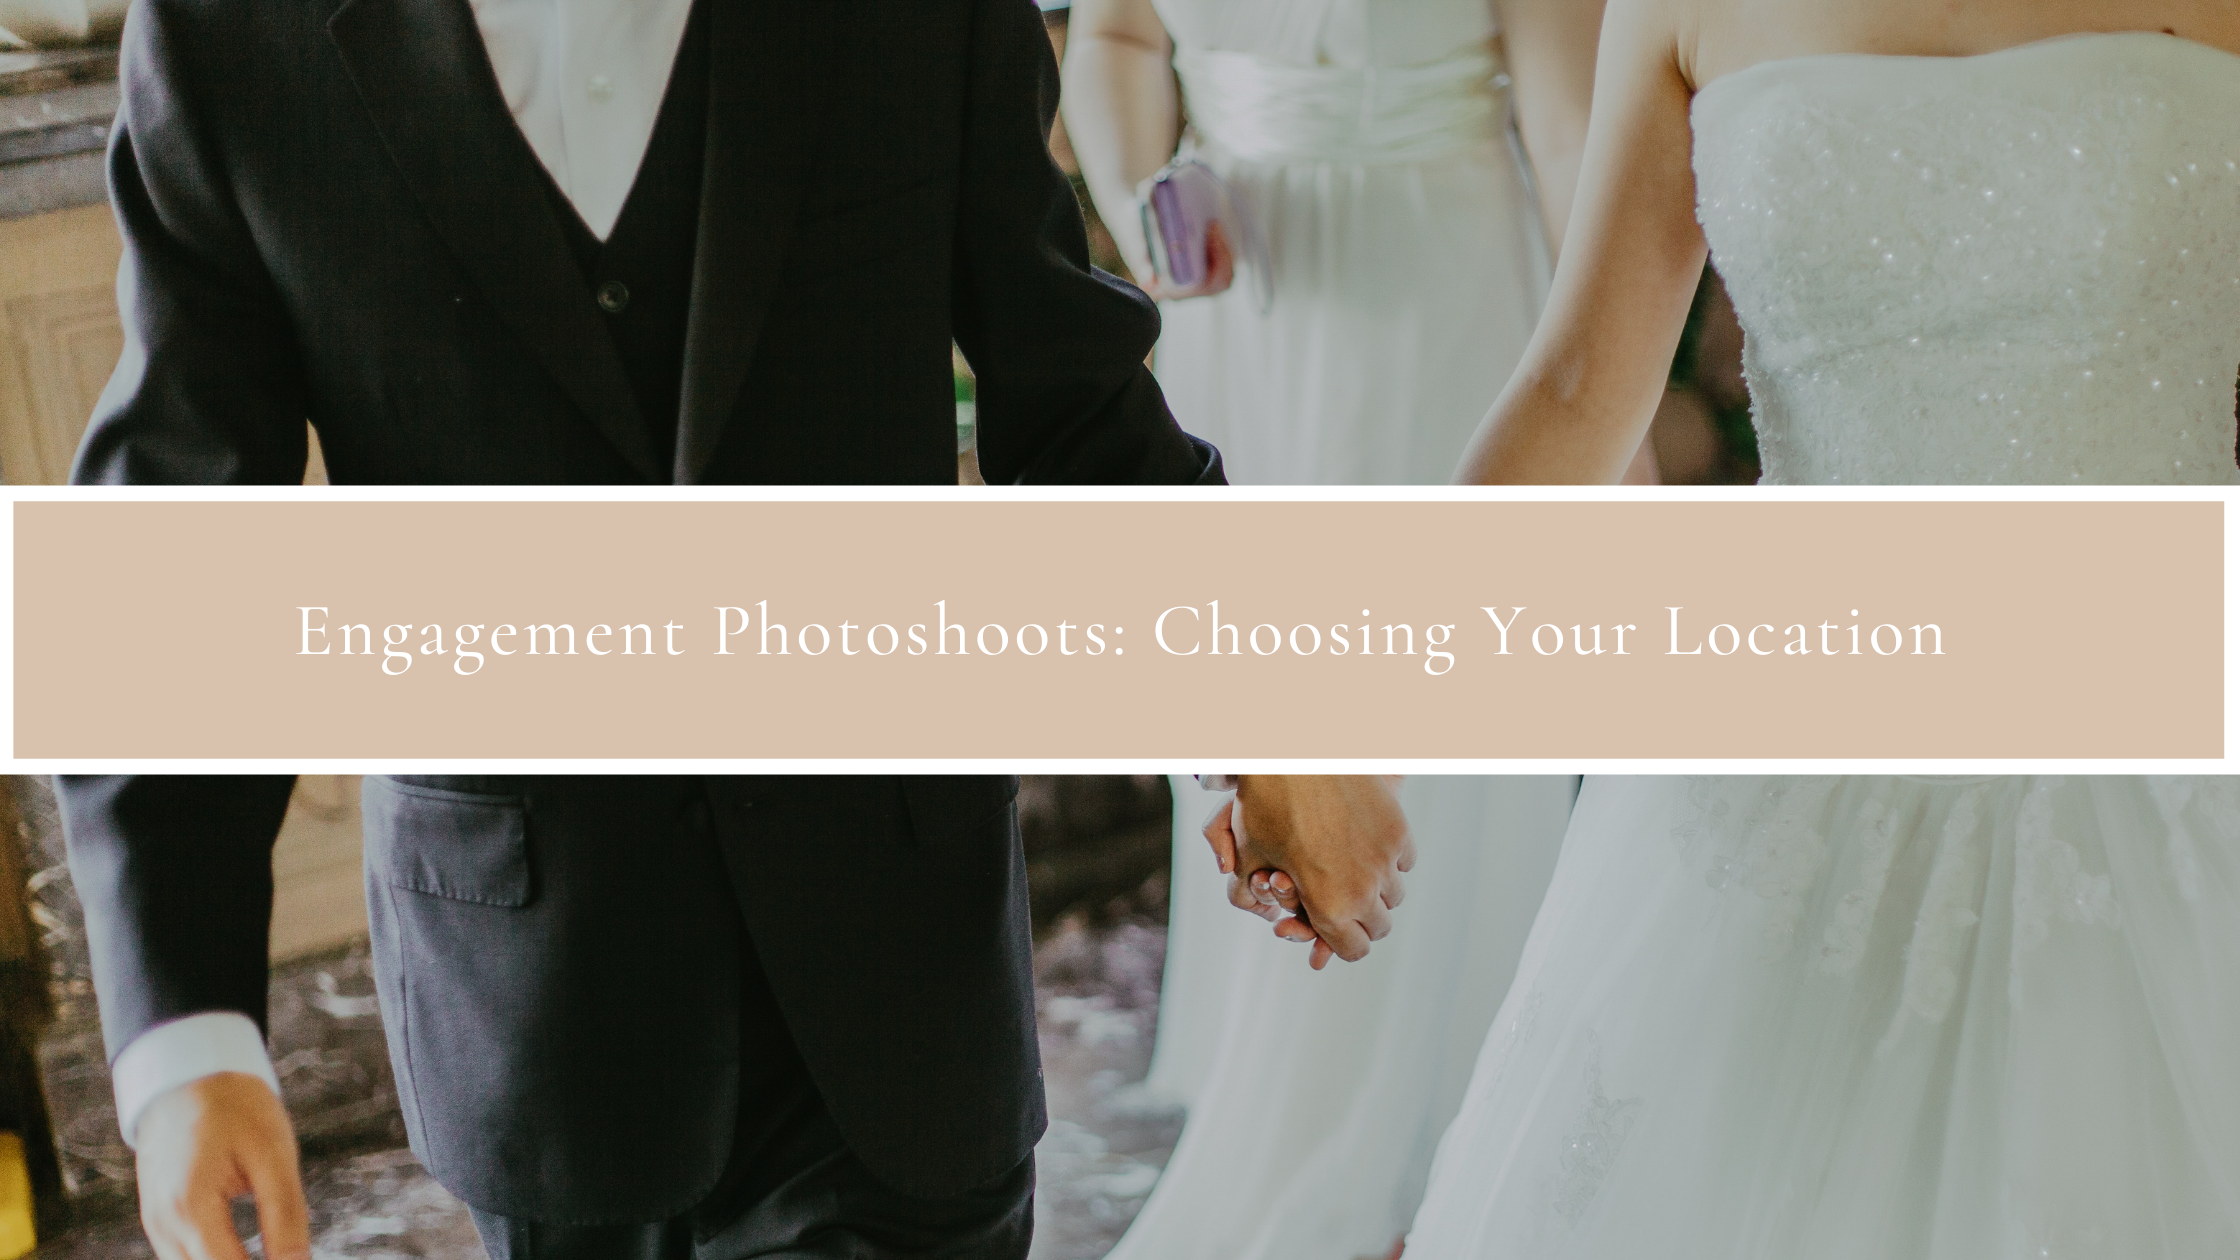 Engagement Photoshoots: Choosing Your Location